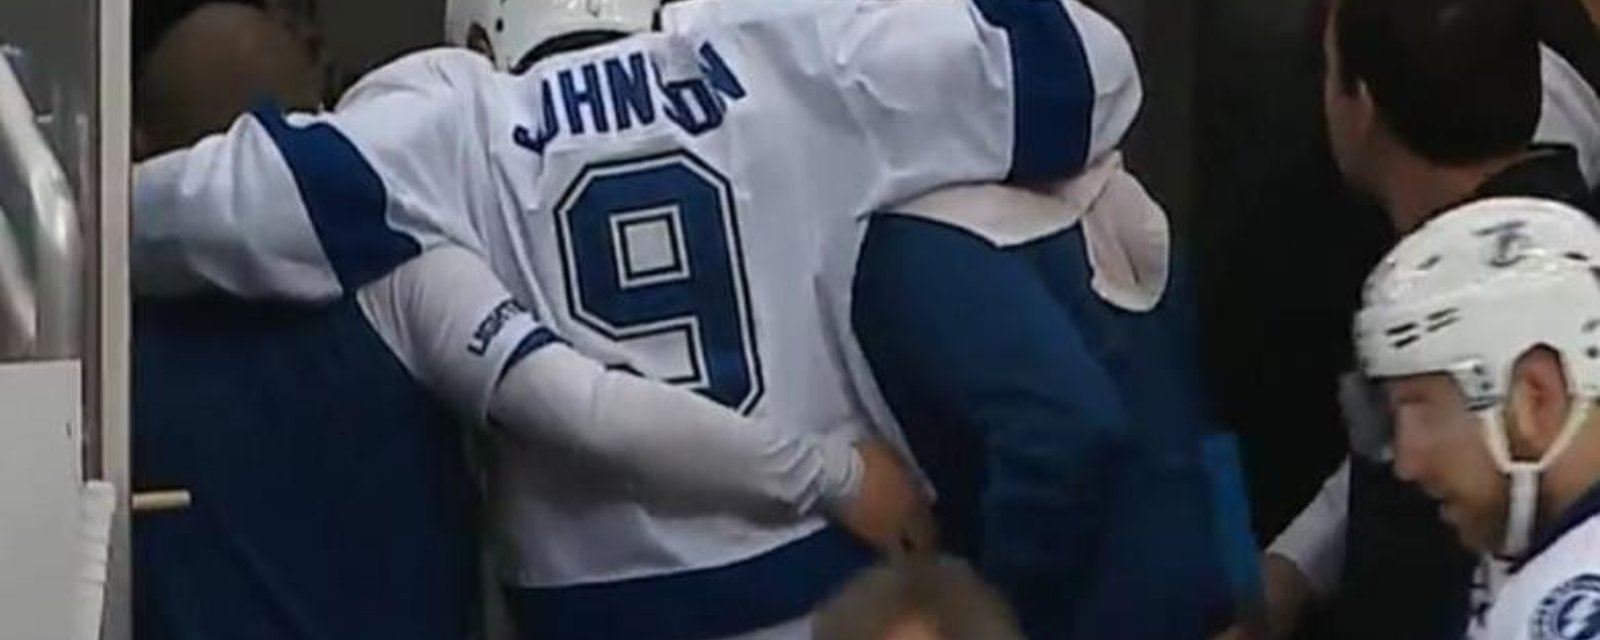 Tyler Johnson reacts awkwardly to incoming hit and gets injured.